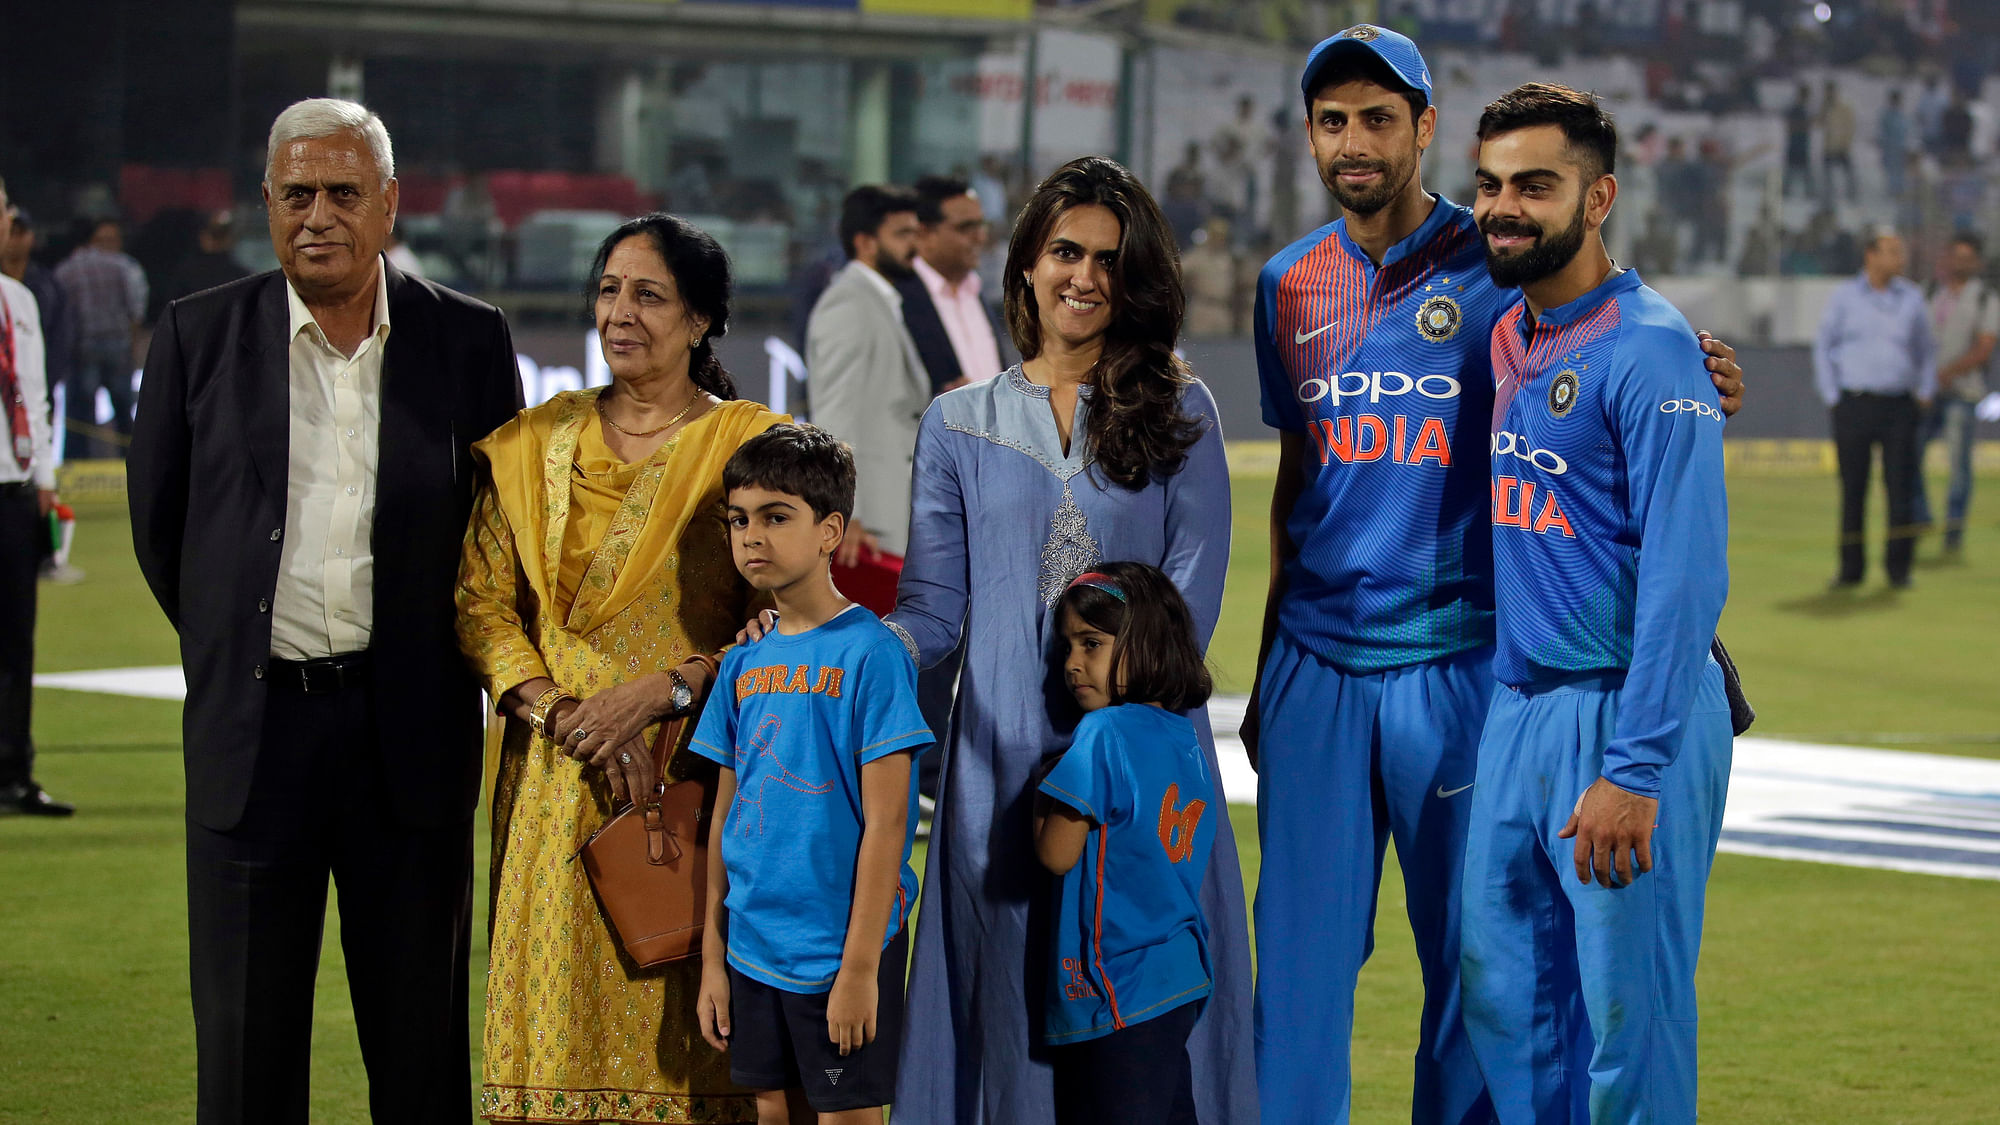 India’s Ashish Nehra, second right, pose with his family, to his left and captain Virat Kohli, right, as he bids farewell at the end of his last international match, during their first Twenty20 cricket match against New Zealand in New Delhi